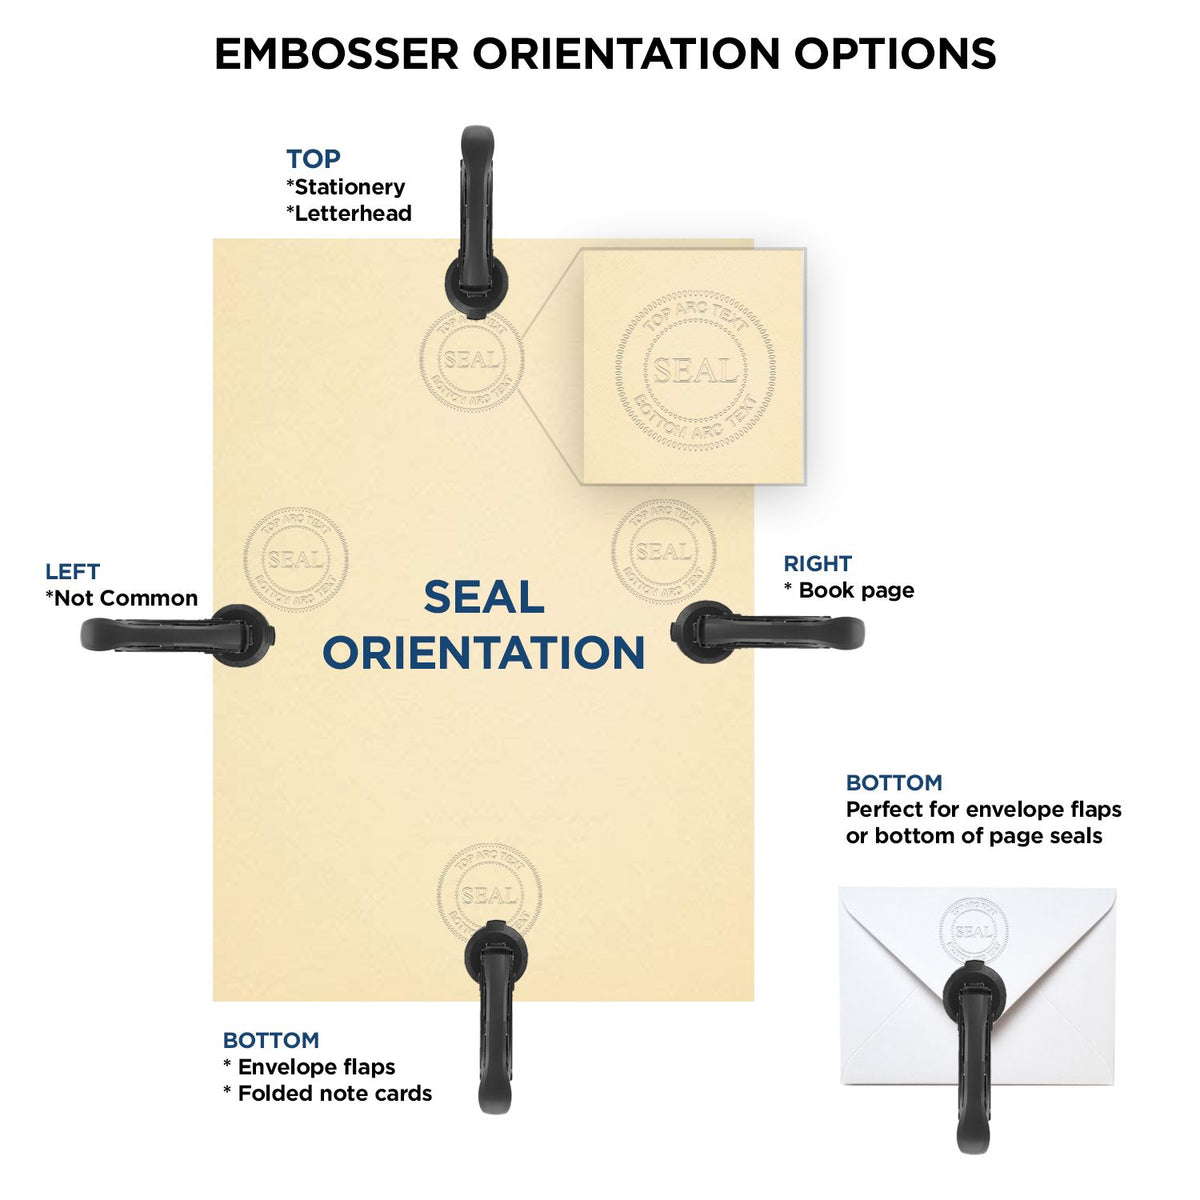 An infographic for the Heavy Duty Cast Iron Maine Architect Embosser showing embosser orientation, this is showing examples of a top, bottom, right and left insert.